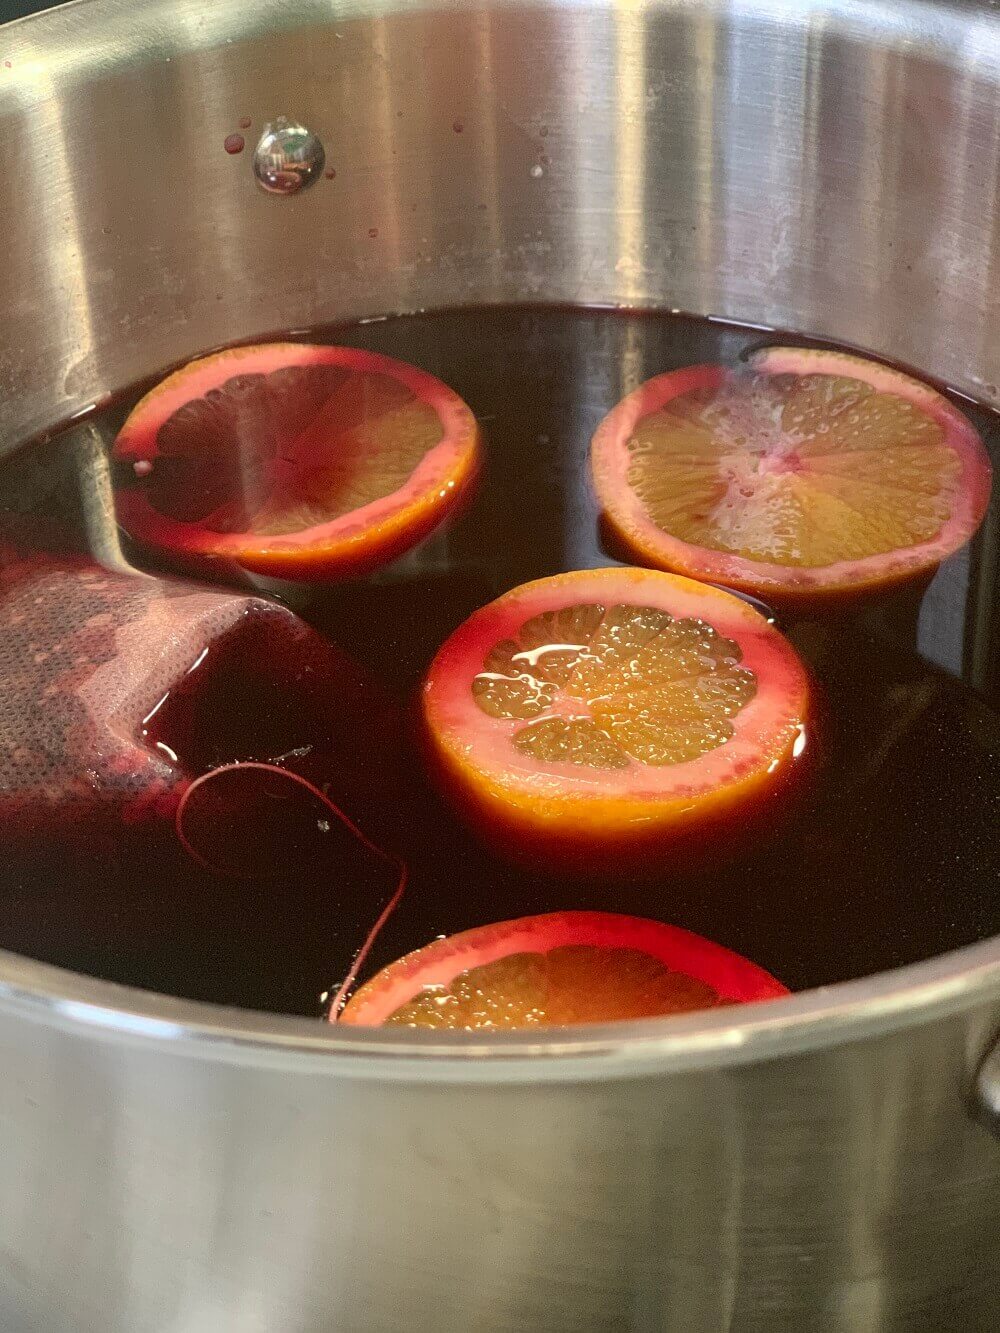 That's Tasty Mulled Wine